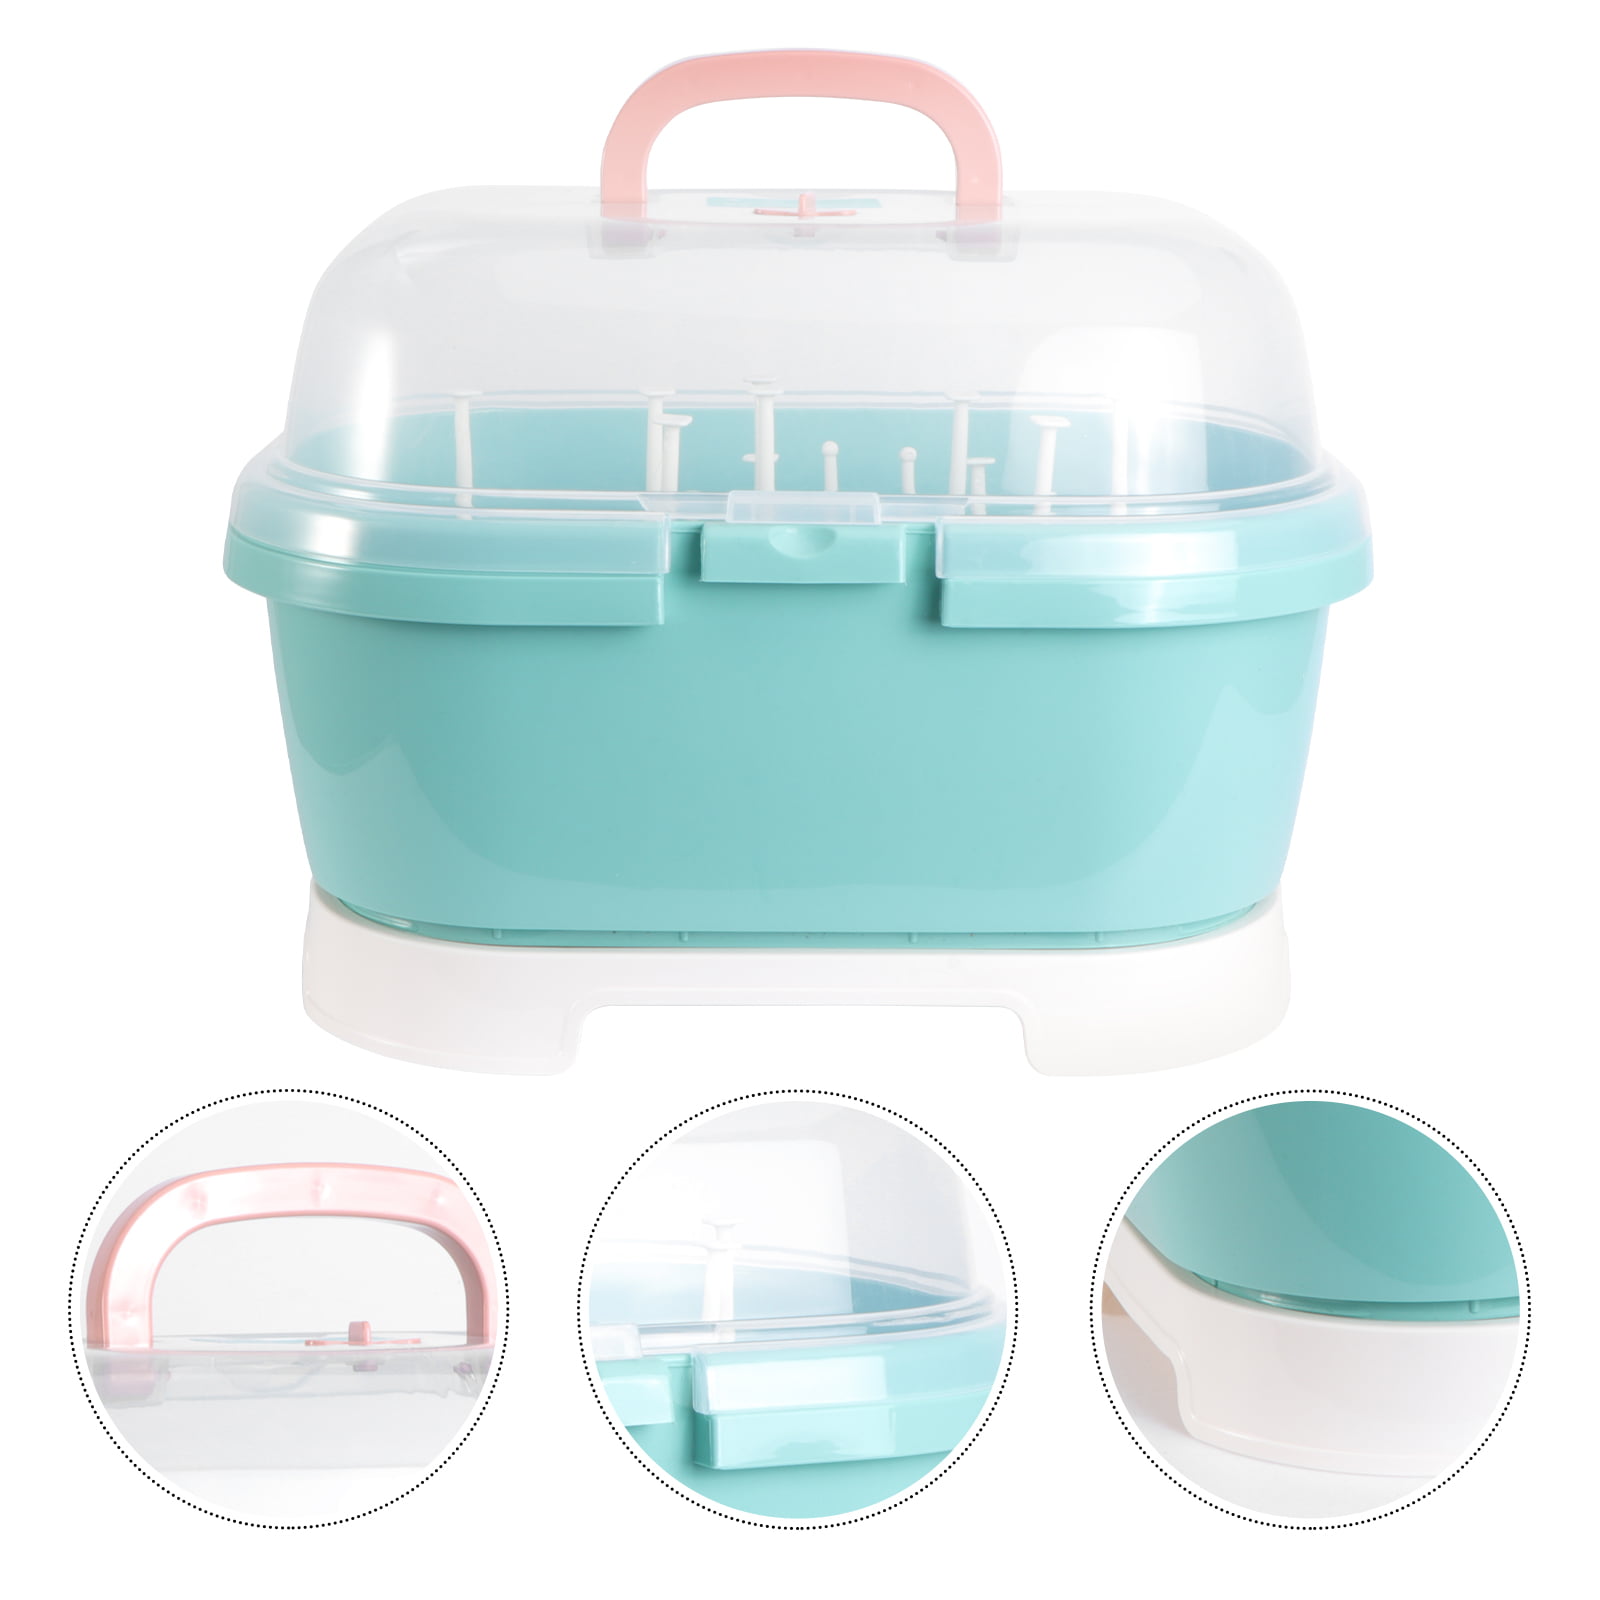 Best Deal for Baby Bottle Storage Box with lid，Baby Bottle